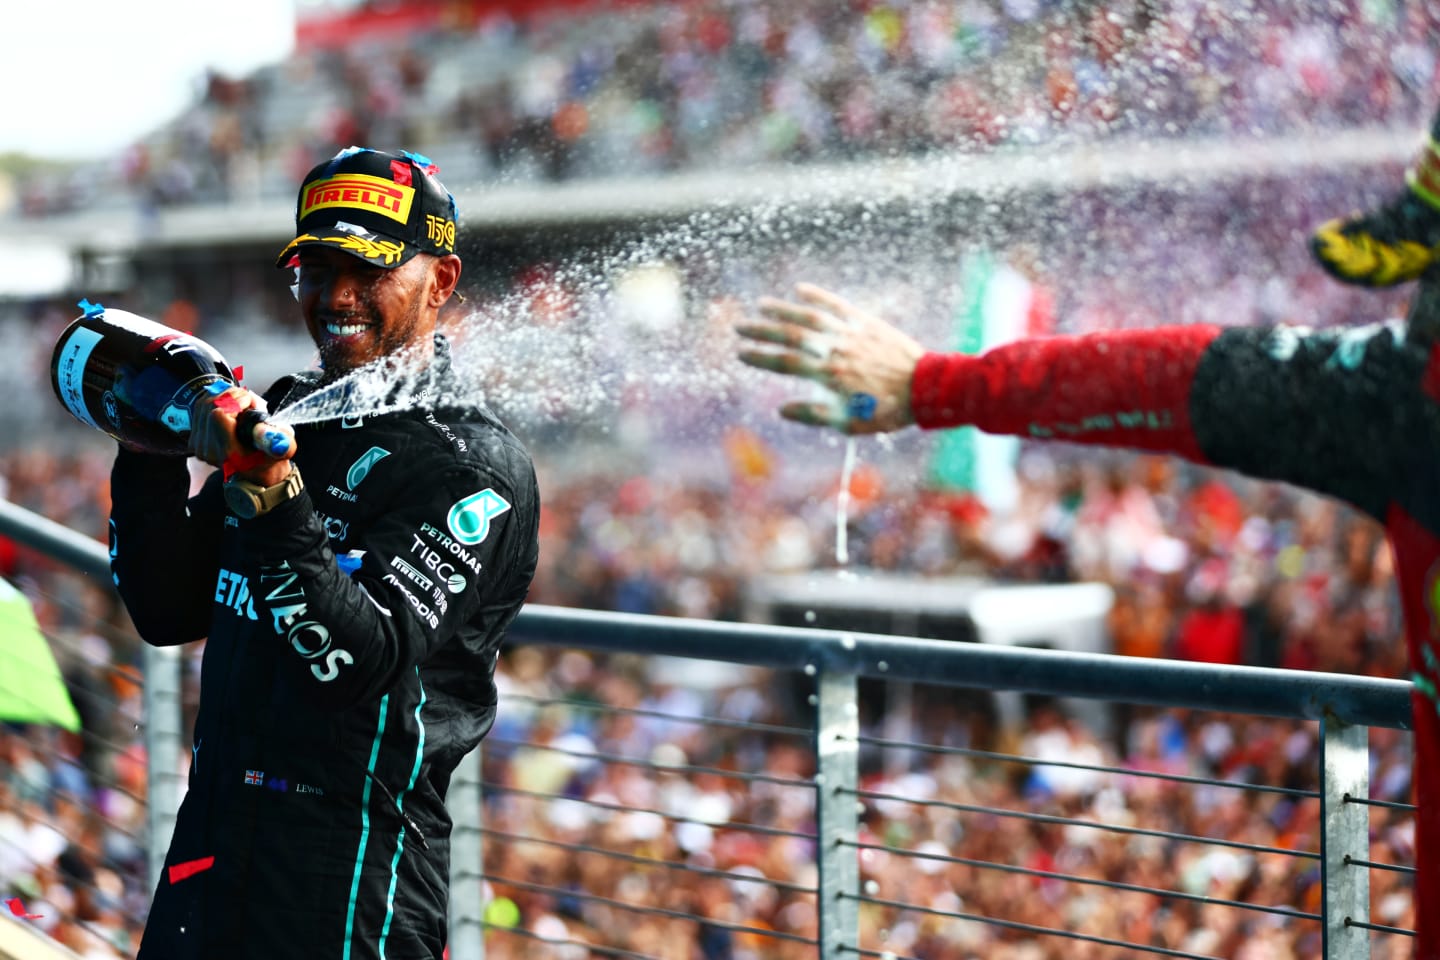 AUSTIN, TEXAS - OCTOBER 23: Second placed Lewis Hamilton of Great Britain and Mercedes celebrates on the podium following the F1 Grand Prix of USA at Circuit of The Americas on October 23, 2022 in Austin, Texas. (Photo by Dan Istitene - Formula 1/Formula 1 via Getty Images)